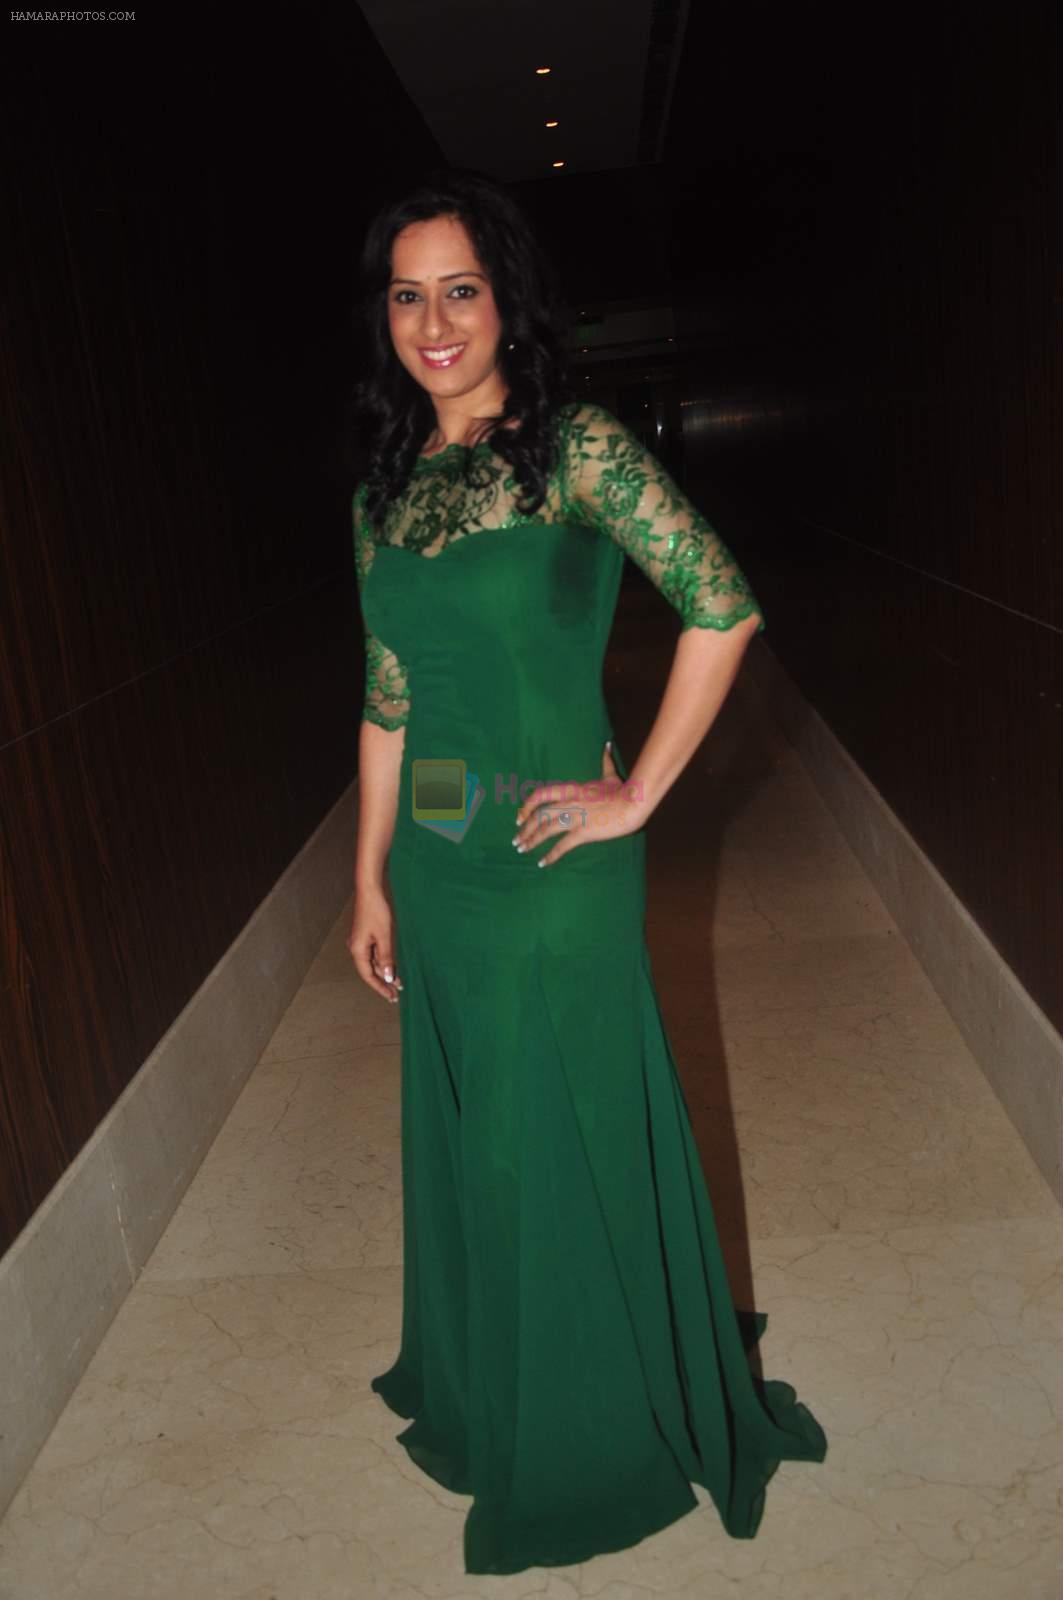 Saisha Sehgal at the launch of R-Vision's movie Udanchhoo directed by Vipin Parashar in Mumbai on 31st March 2015